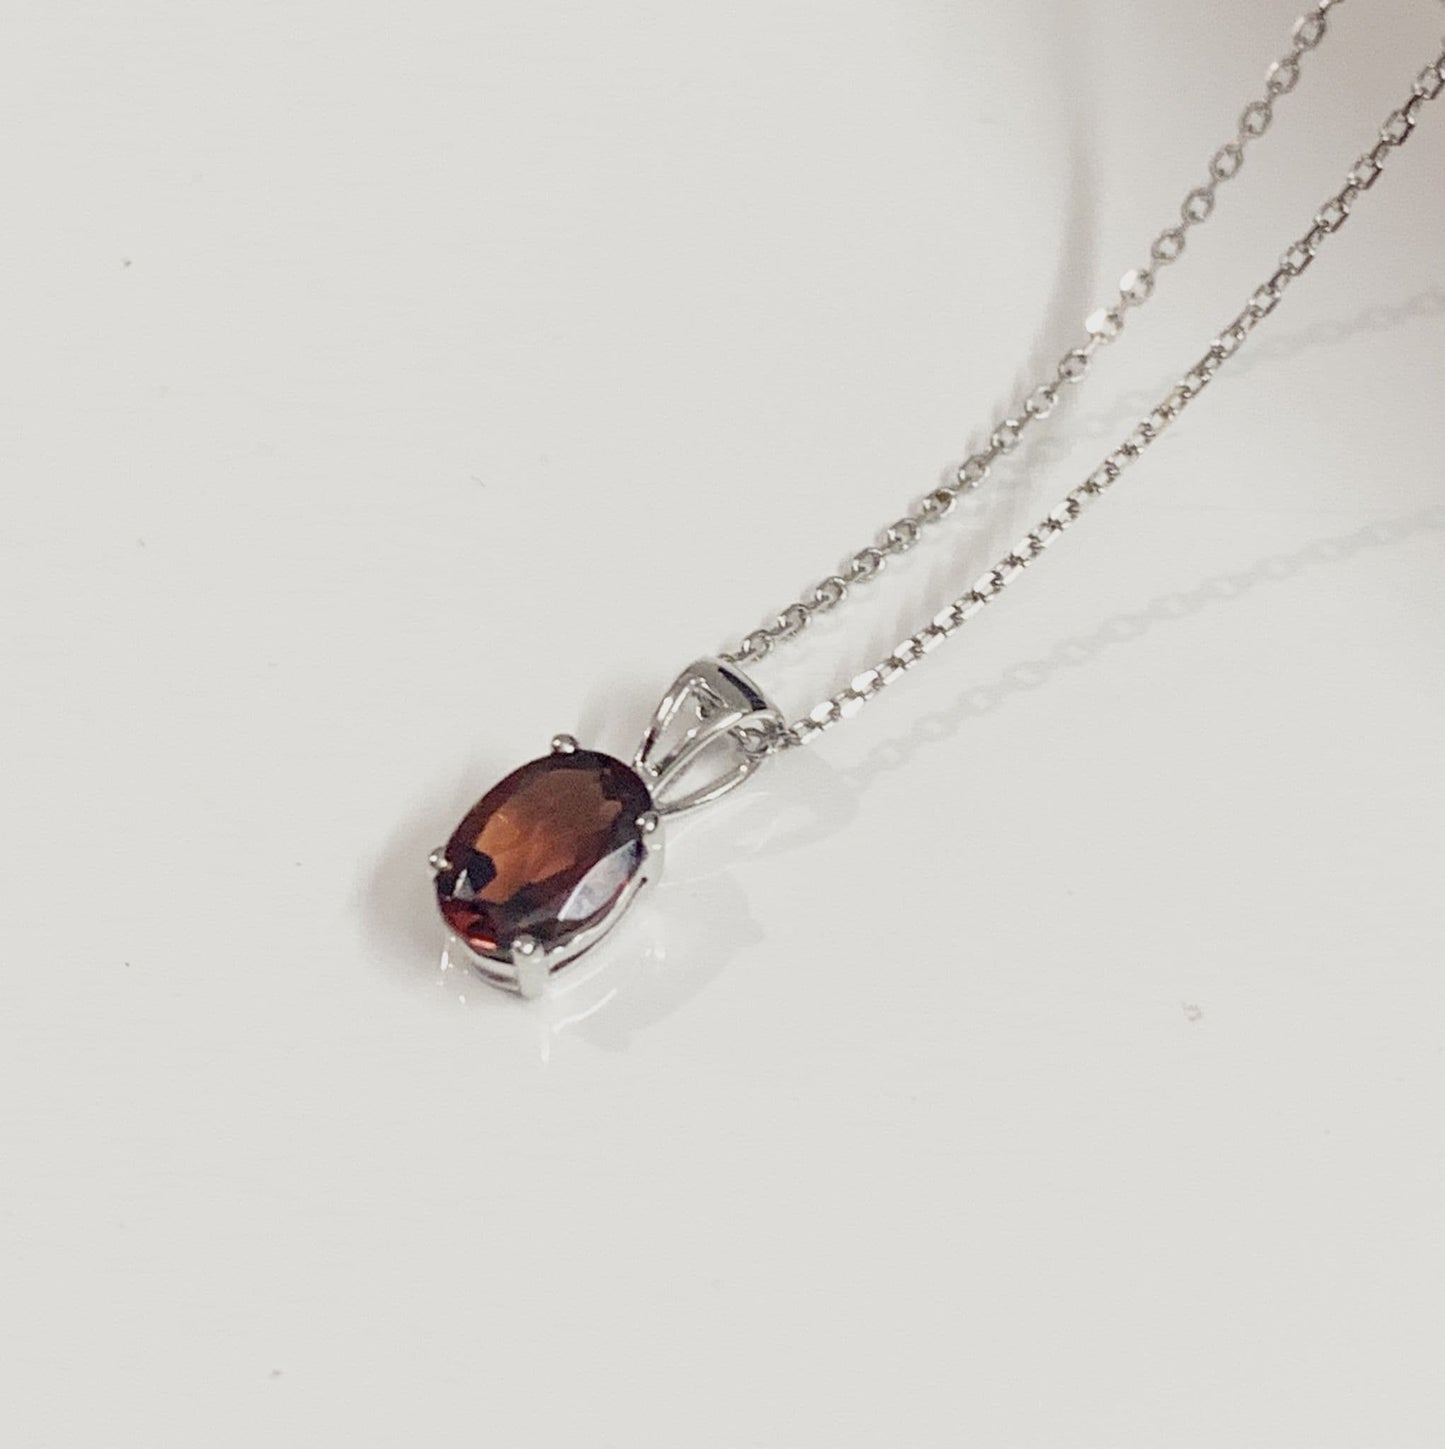 Oval red garnet necklace pendant white gold